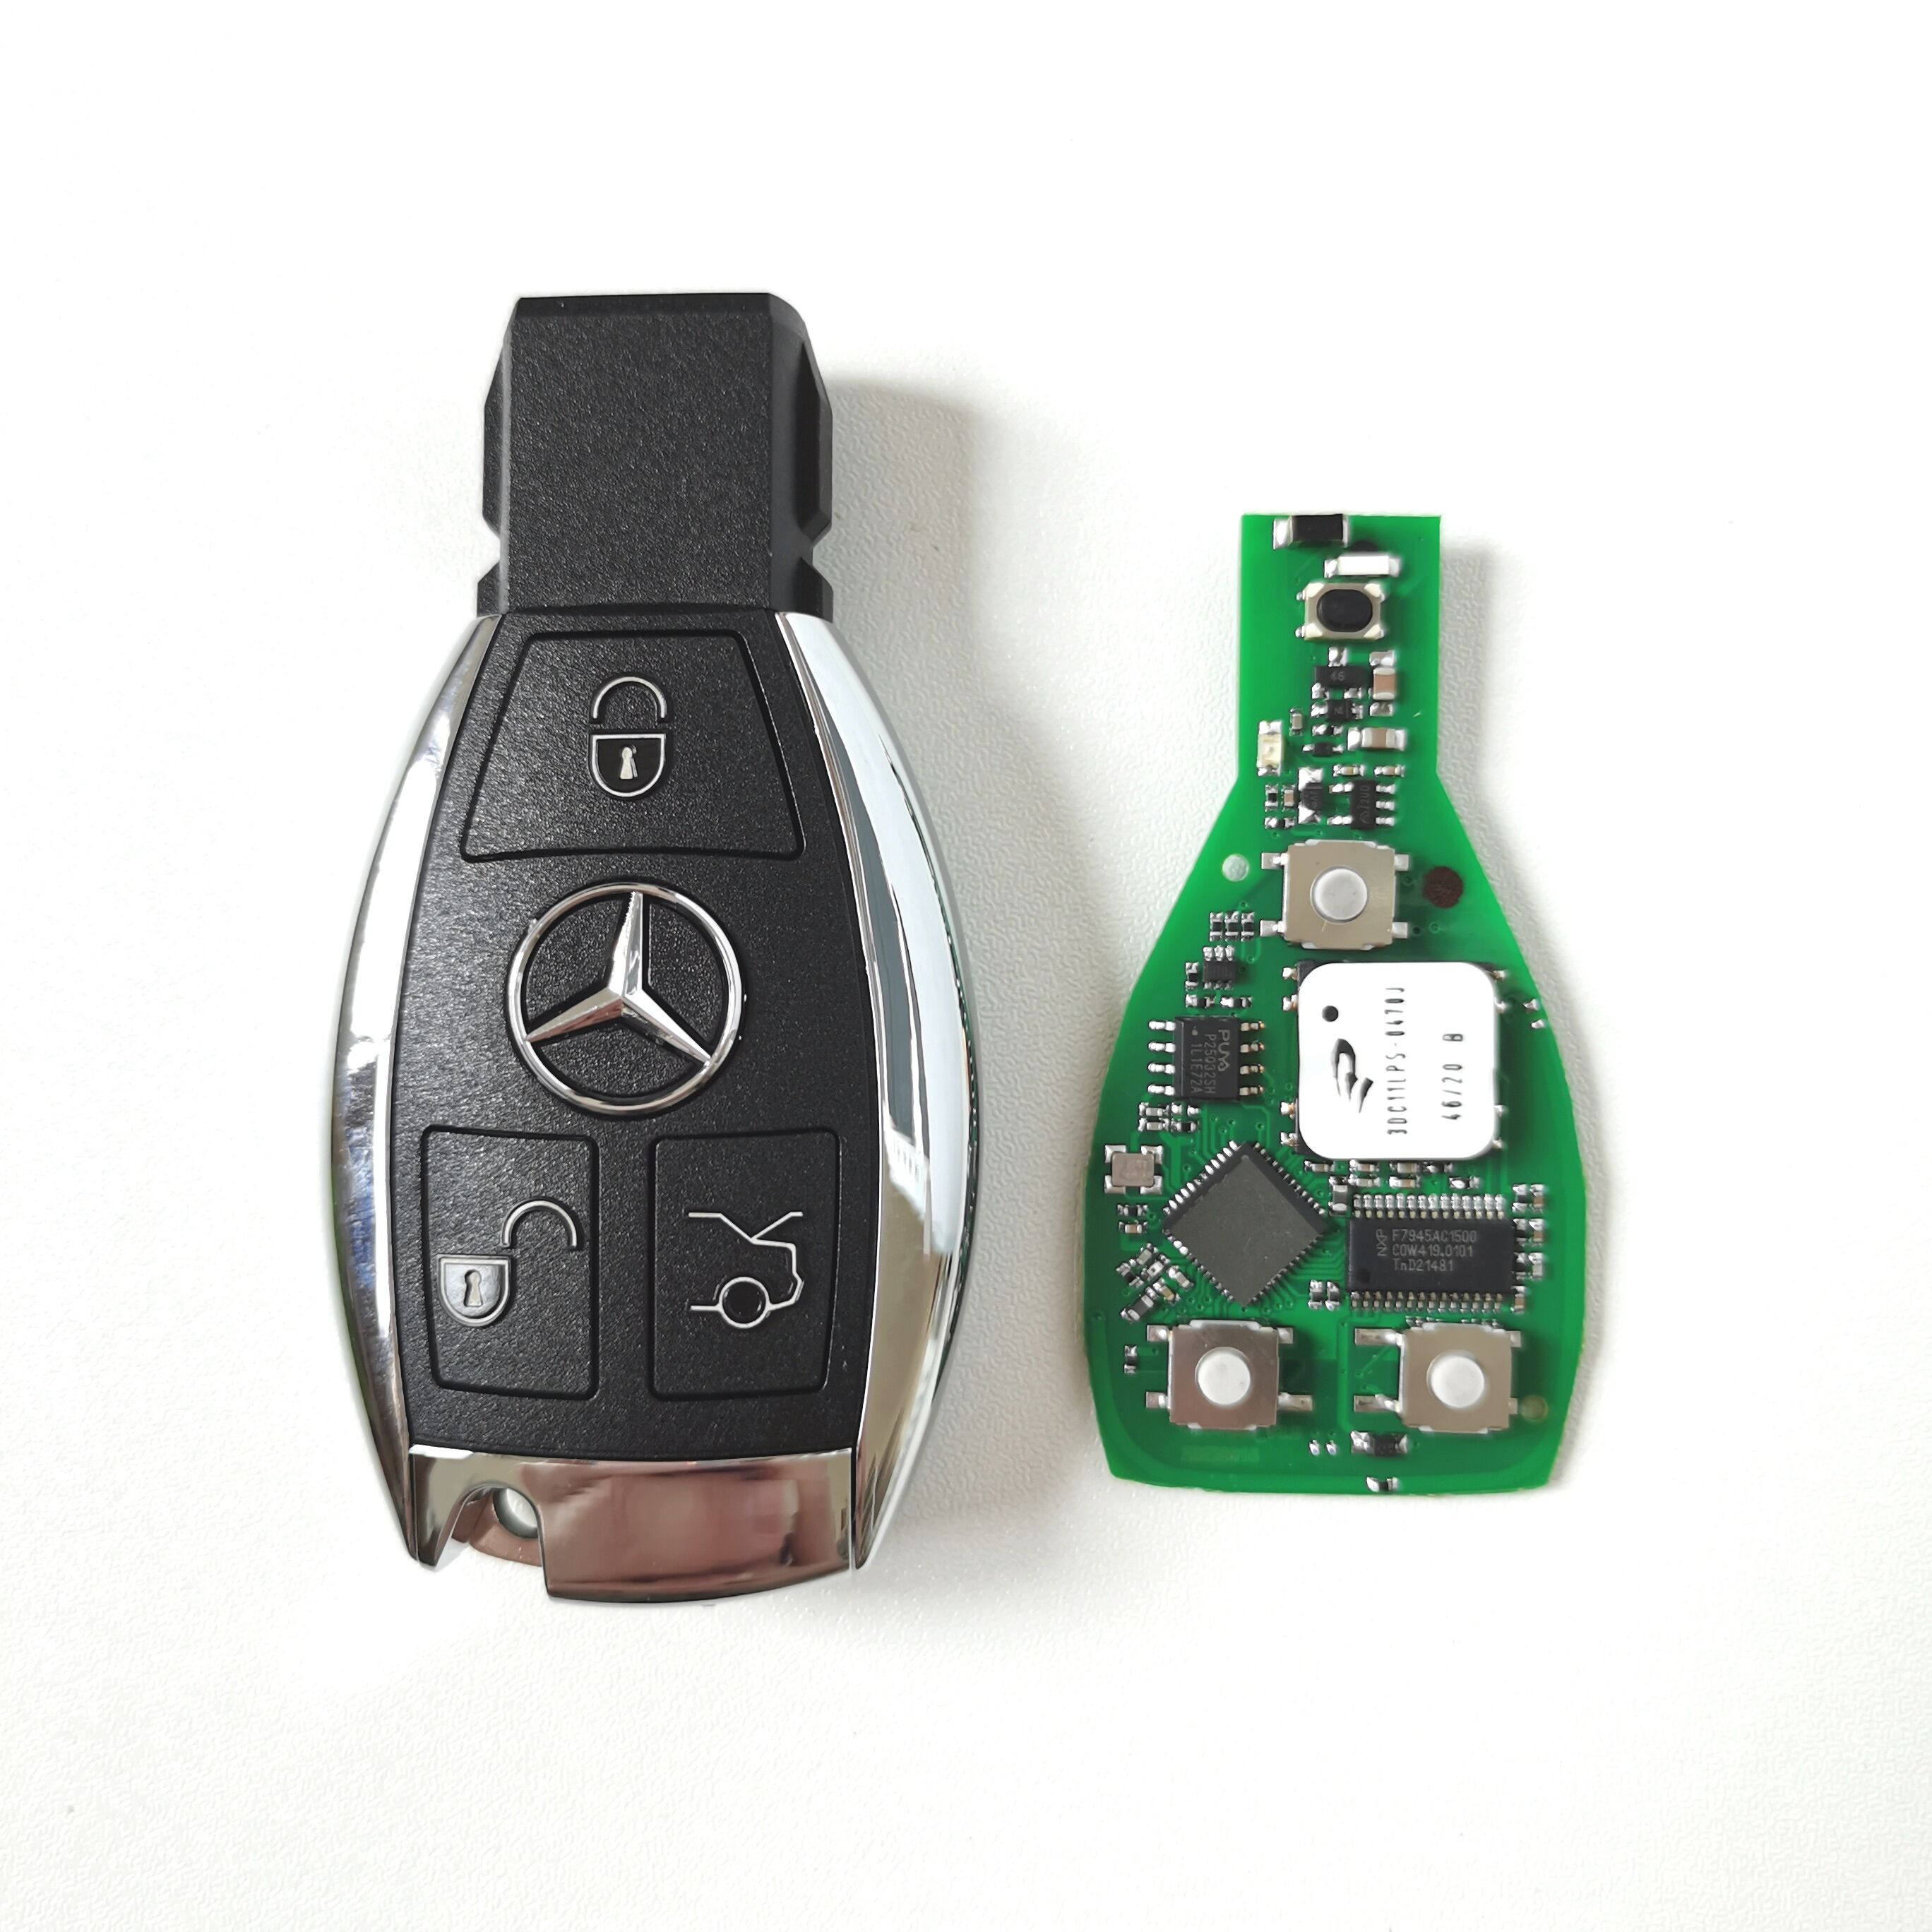  434 MHz 3 Buttons NEC Smart Proximity Key for Mercedes Benz - Support 03 06 05 07 08 Version